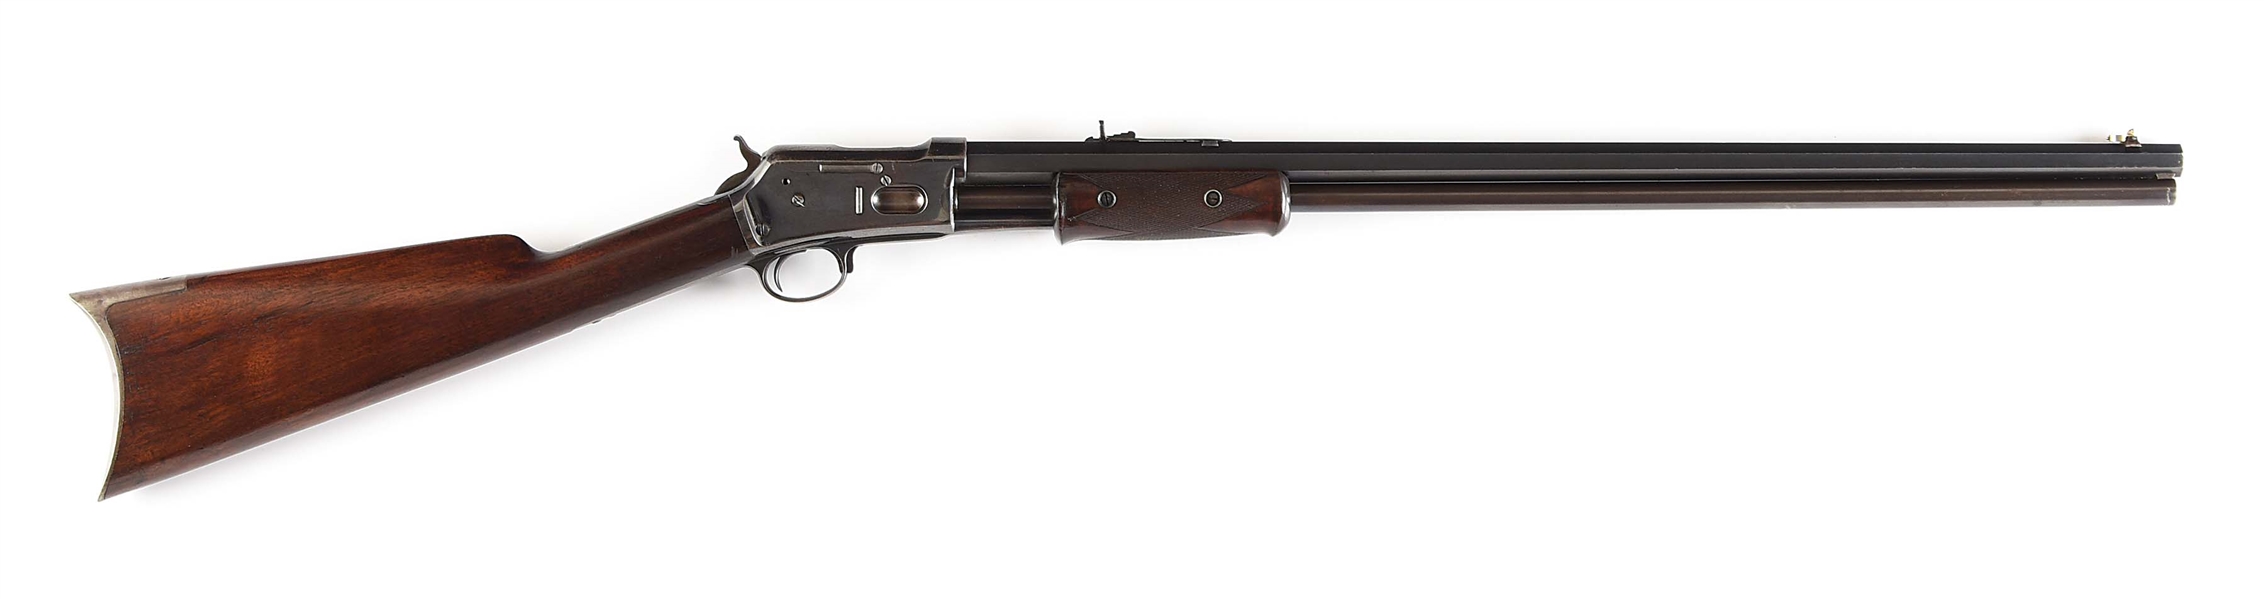 (A) HIGH CONDITION COLT LIGHTNING SLIDE ACTION RIFLE (1890).